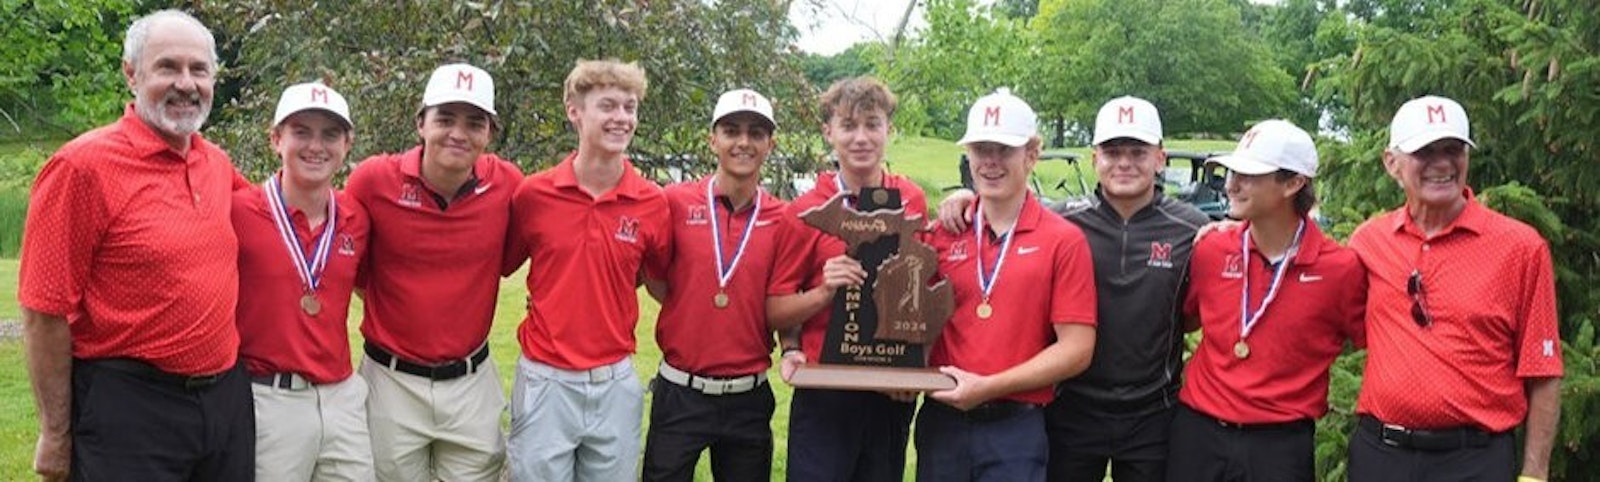 Tom Brecht (left) has coached St. Mary’s Prep golf team for 26 years. “I thought it would come,” he said about the Eaglets winning the school’s first golf championship. St. Mary’s won by one stroke in a tense two-day scramble among three teams. (Photo courtesy MHSAA)